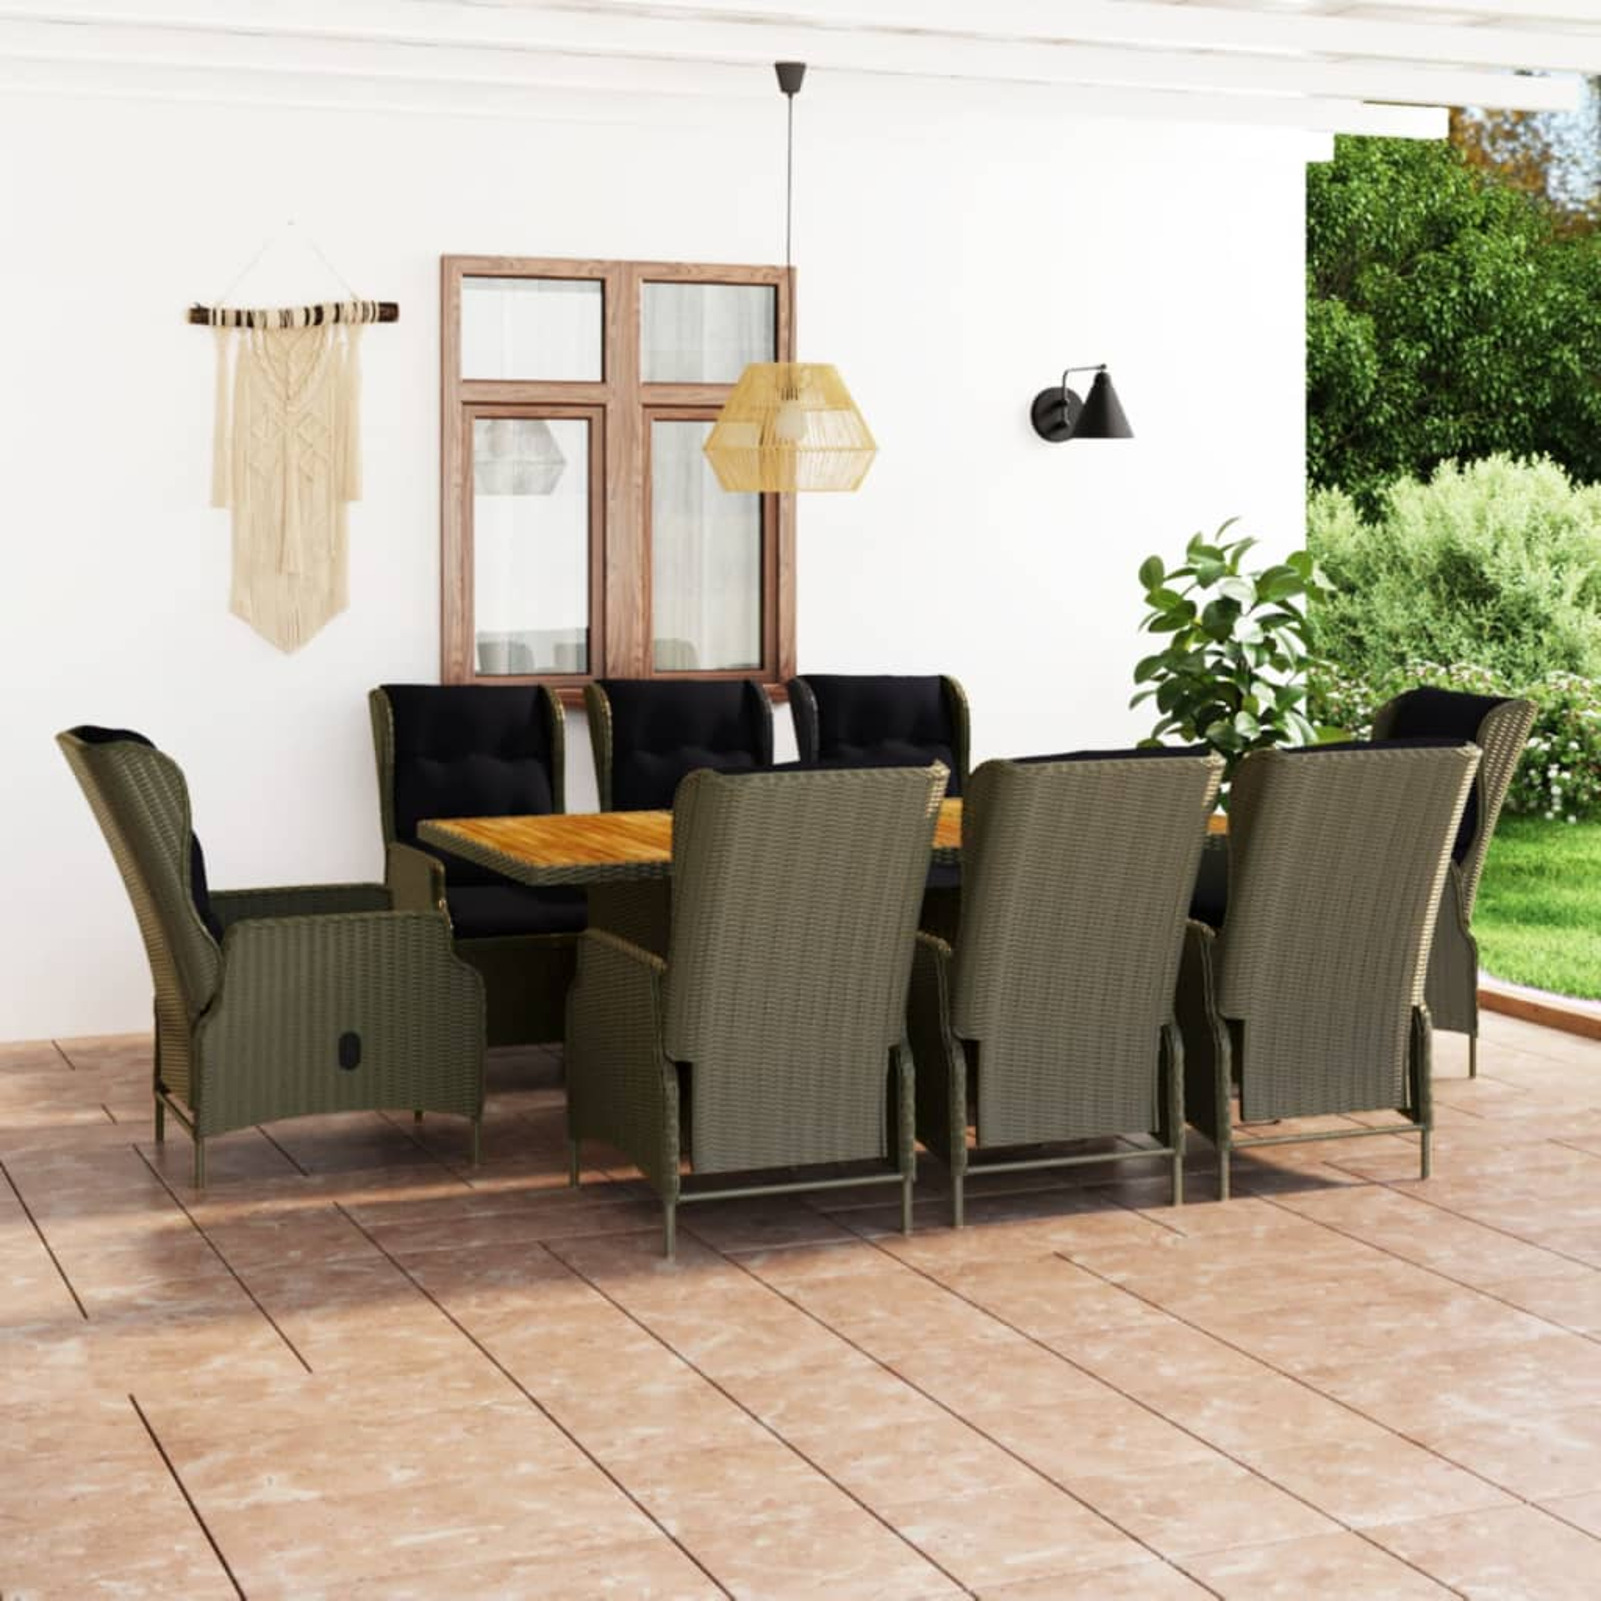 9 Piece Patio Dining Set with Cushions Poly Rattan Brown - image 1 of 7